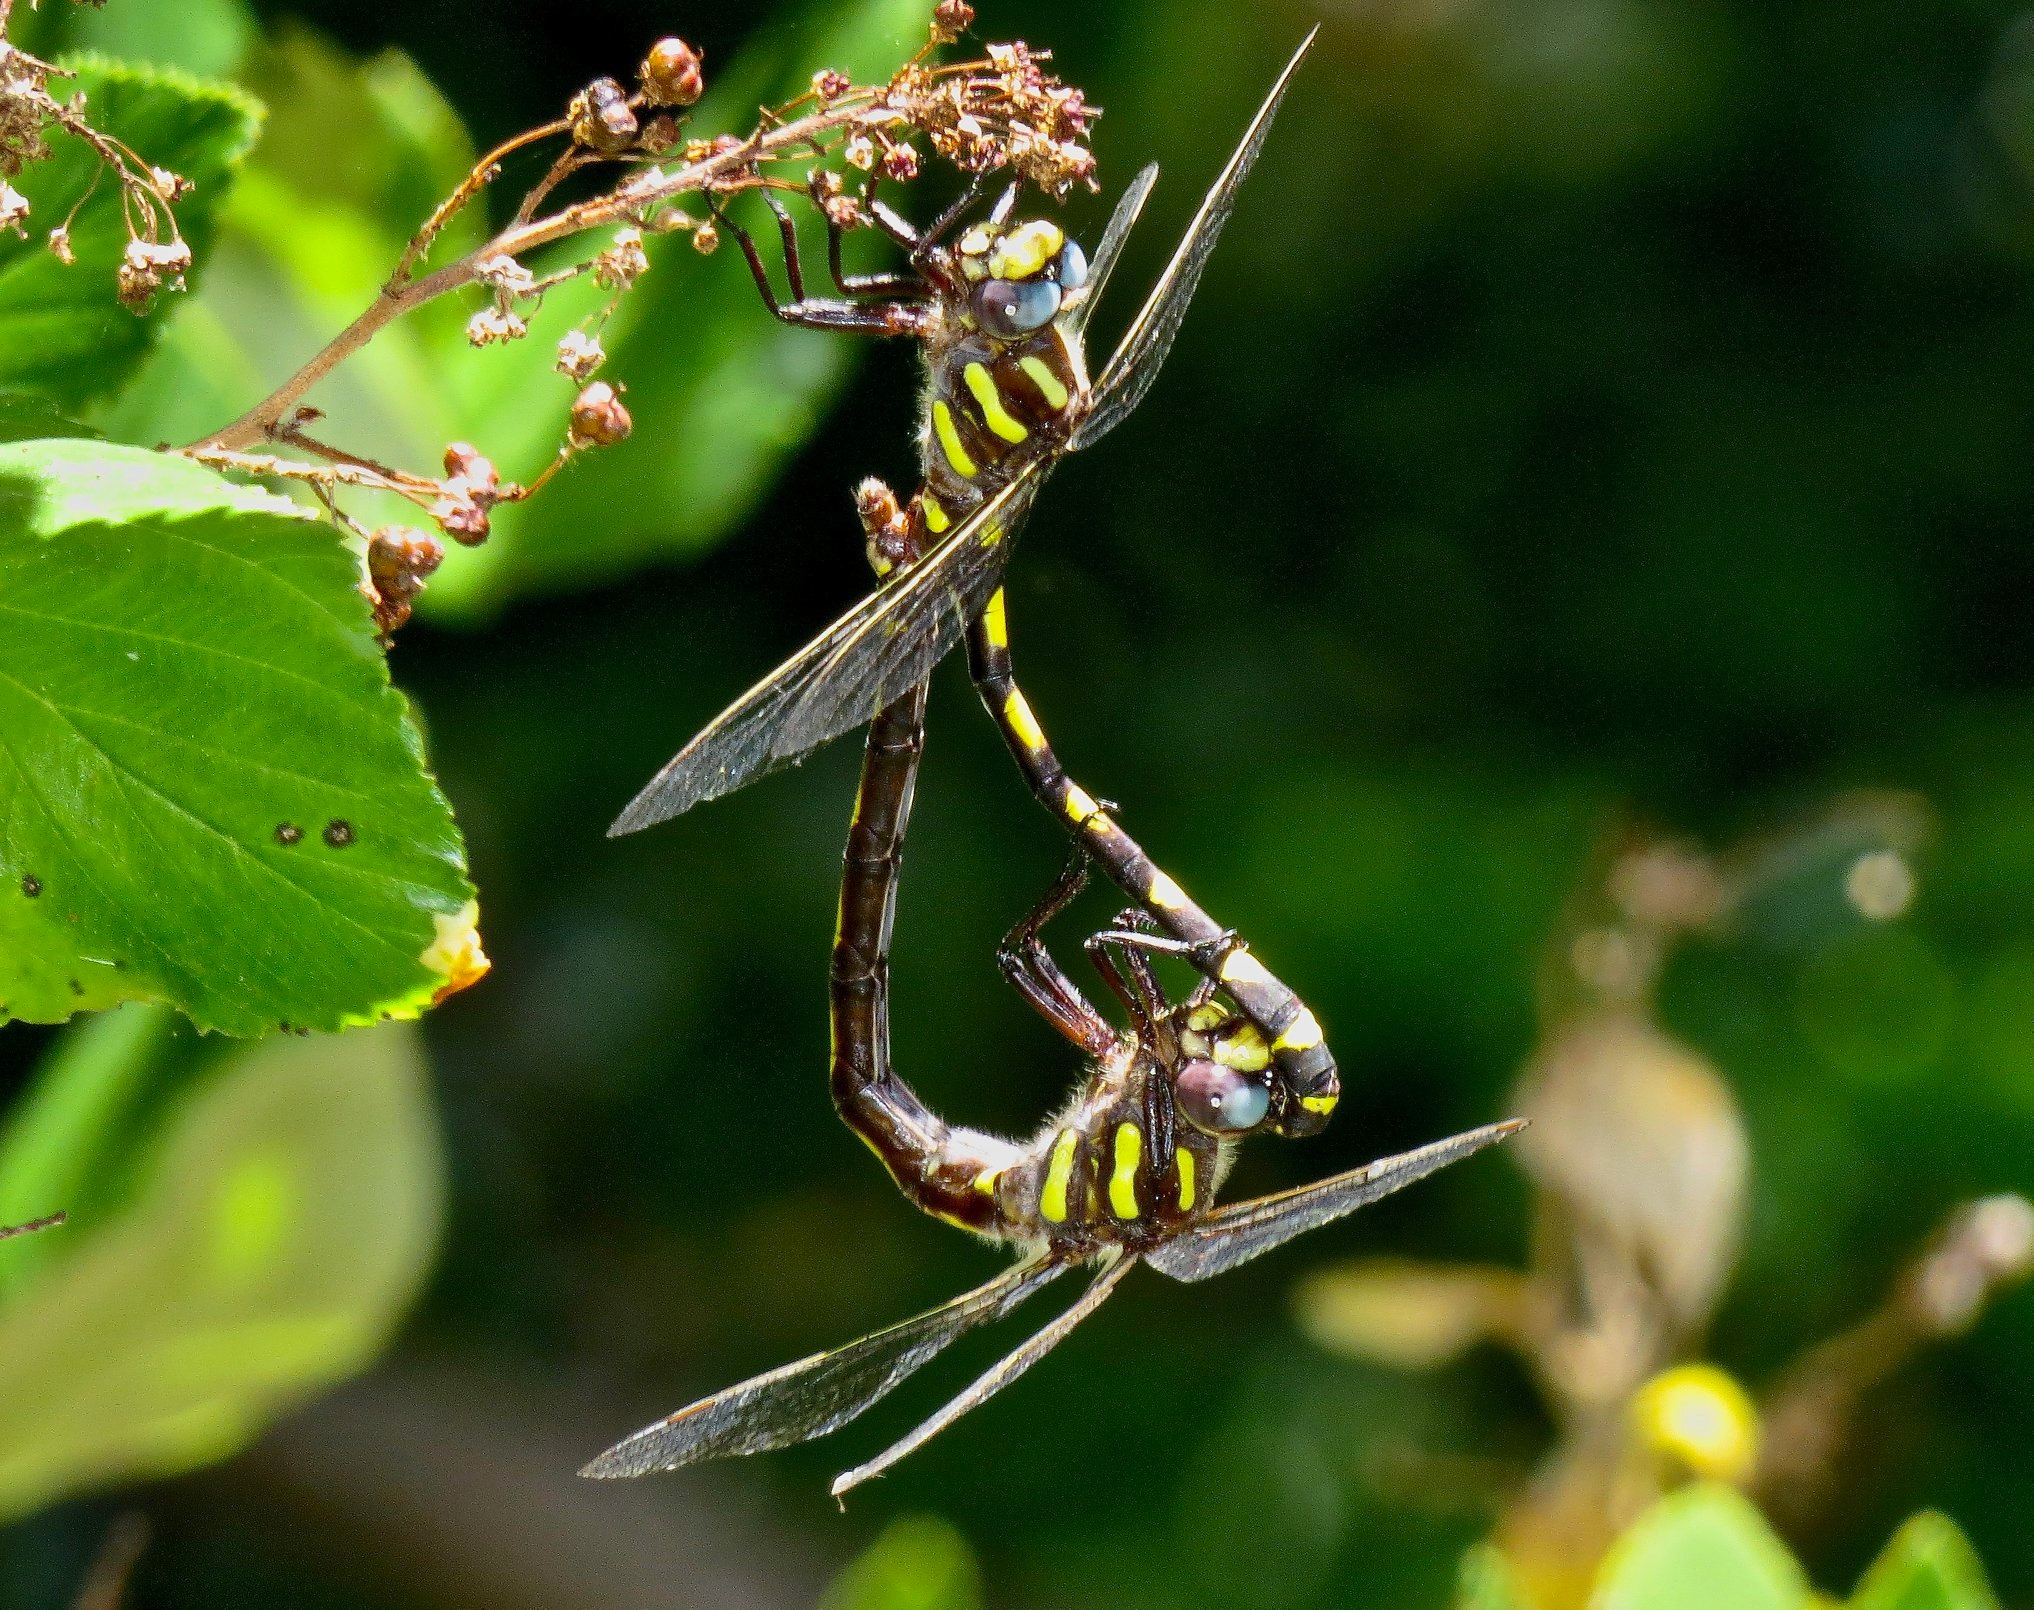 Two yellow and black dragonflies mating